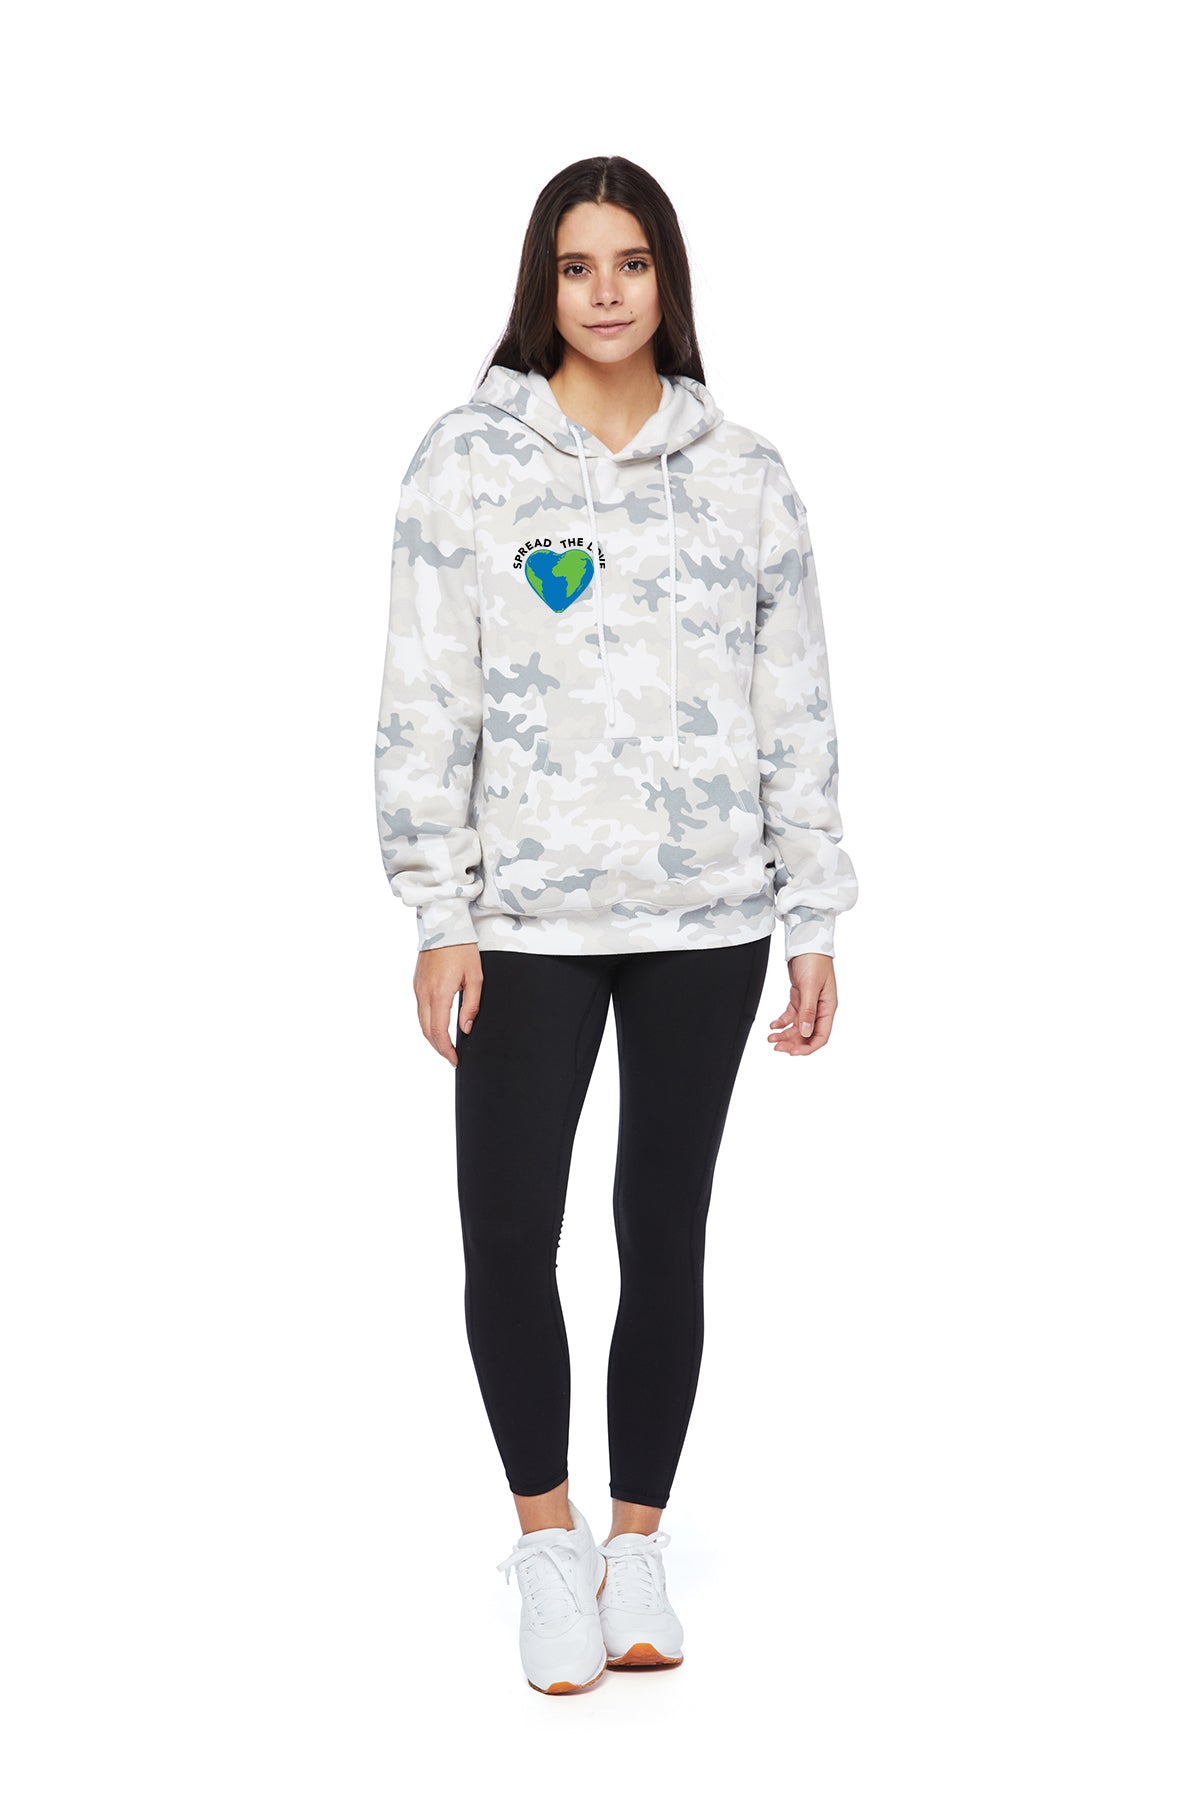 Chloe Earth Day Hoodie in White Camo from Lazypants - always a great buy at a reasonable price.